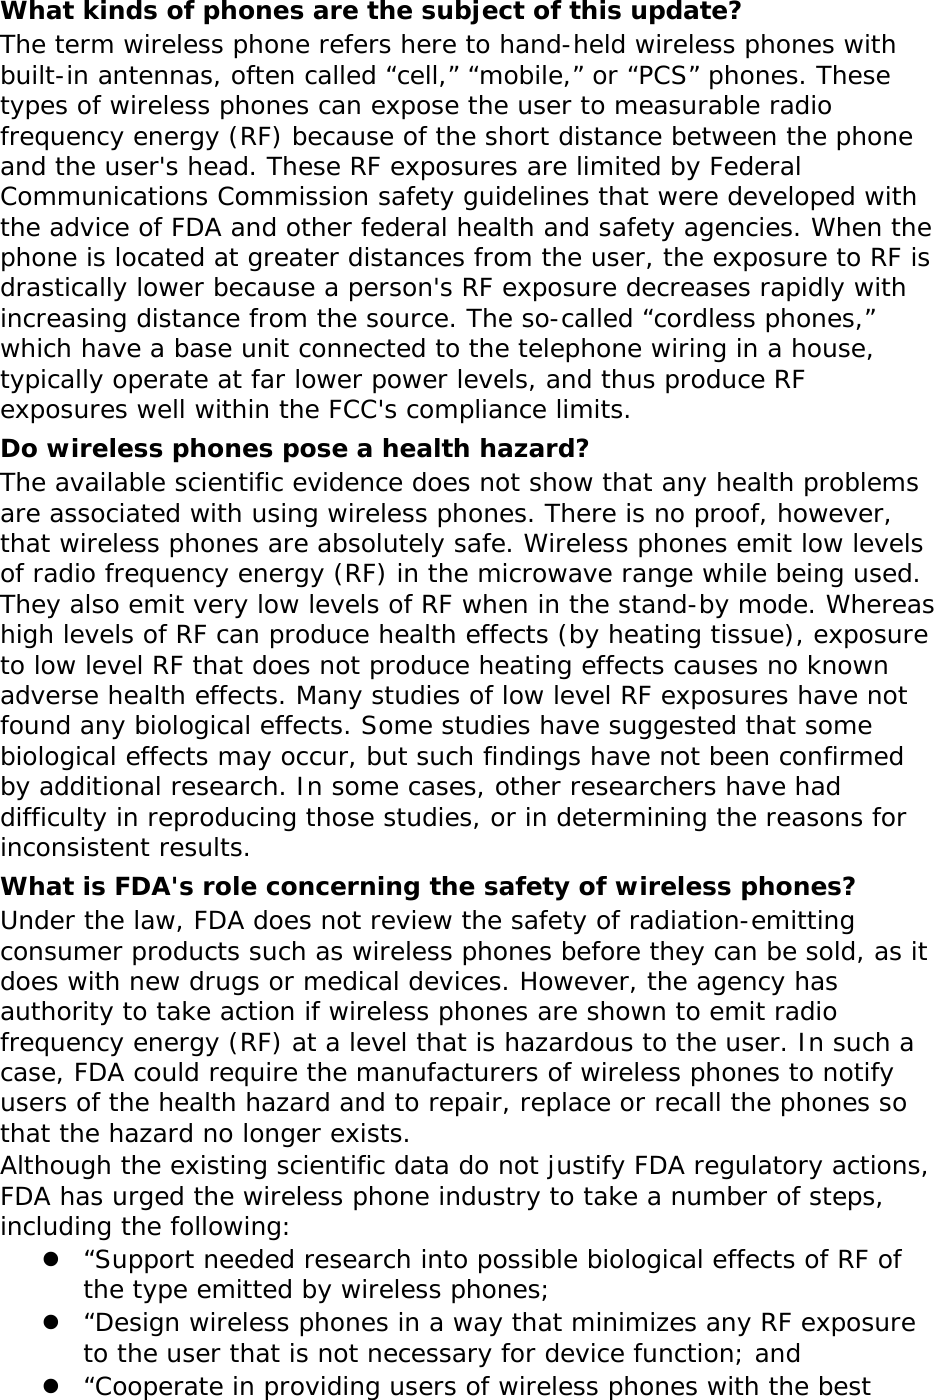 What kinds of phones are the subject of this update? The term wireless phone refers here to hand-held wireless phones with built-in antennas, often called “cell,” “mobile,” or “PCS” phones. These types of wireless phones can expose the user to measurable radio frequency energy (RF) because of the short distance between the phone and the user&apos;s head. These RF exposures are limited by Federal Communications Commission safety guidelines that were developed with the advice of FDA and other federal health and safety agencies. When the phone is located at greater distances from the user, the exposure to RF is drastically lower because a person&apos;s RF exposure decreases rapidly with increasing distance from the source. The so-called “cordless phones,” which have a base unit connected to the telephone wiring in a house, typically operate at far lower power levels, and thus produce RF exposures well within the FCC&apos;s compliance limits. Do wireless phones pose a health hazard? The available scientific evidence does not show that any health problems are associated with using wireless phones. There is no proof, however, that wireless phones are absolutely safe. Wireless phones emit low levels of radio frequency energy (RF) in the microwave range while being used. They also emit very low levels of RF when in the stand-by mode. Whereas high levels of RF can produce health effects (by heating tissue), exposure to low level RF that does not produce heating effects causes no known adverse health effects. Many studies of low level RF exposures have not found any biological effects. Some studies have suggested that some biological effects may occur, but such findings have not been confirmed by additional research. In some cases, other researchers have had difficulty in reproducing those studies, or in determining the reasons for inconsistent results. What is FDA&apos;s role concerning the safety of wireless phones? Under the law, FDA does not review the safety of radiation-emitting consumer products such as wireless phones before they can be sold, as it does with new drugs or medical devices. However, the agency has authority to take action if wireless phones are shown to emit radio frequency energy (RF) at a level that is hazardous to the user. In such a case, FDA could require the manufacturers of wireless phones to notify users of the health hazard and to repair, replace or recall the phones so that the hazard no longer exists. Although the existing scientific data do not justify FDA regulatory actions, FDA has urged the wireless phone industry to take a number of steps, including the following:  “Support needed research into possible biological effects of RF of the type emitted by wireless phones;  “Design wireless phones in a way that minimizes any RF exposure to the user that is not necessary for device function; and  “Cooperate in providing users of wireless phones with the best 